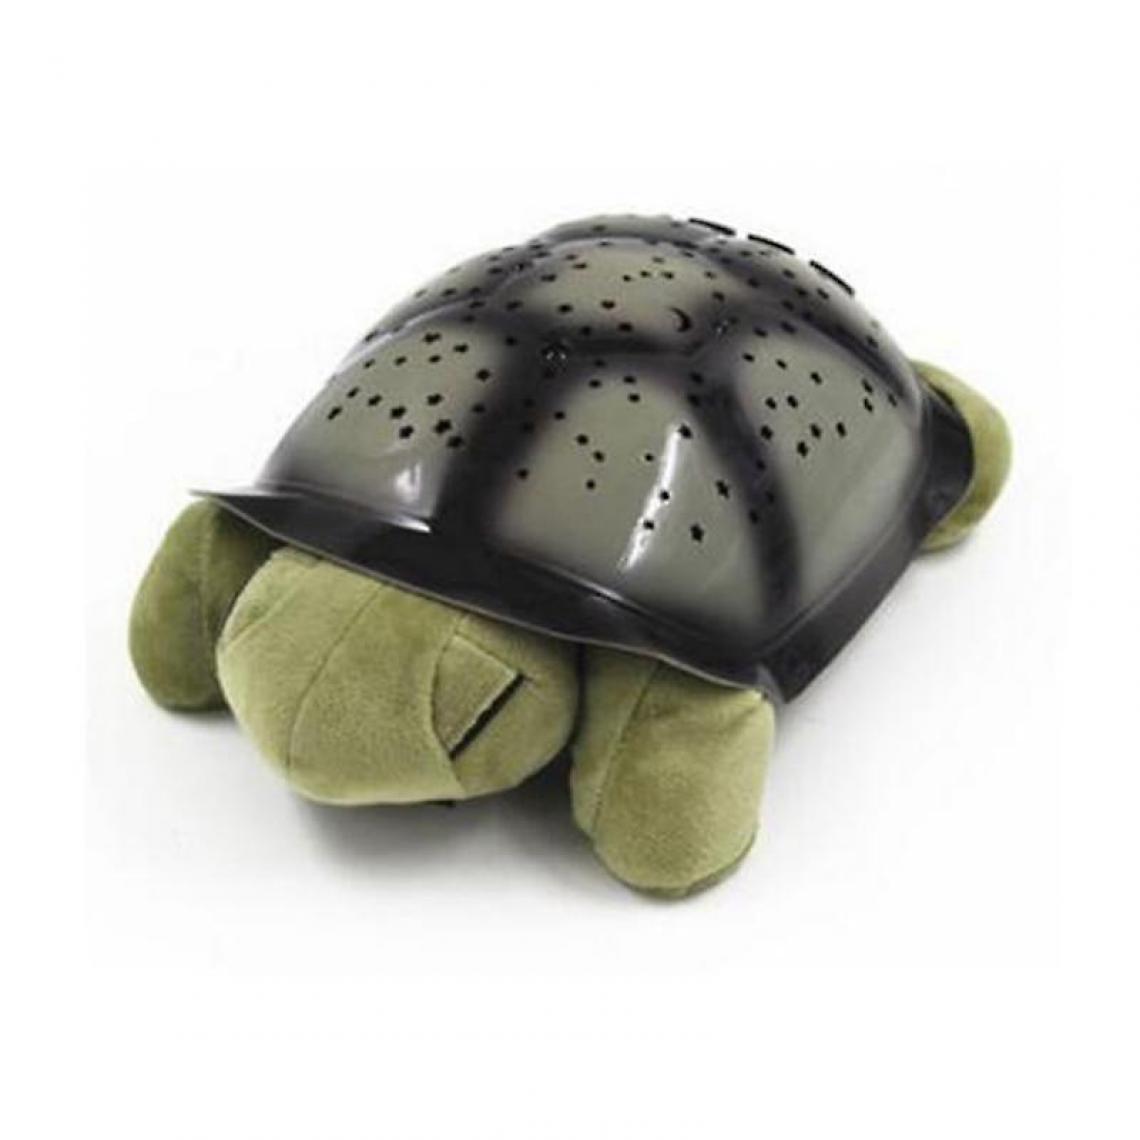 Universal - Lovely Turtle Design LED Night Light Star Projector (marron) - Animaux